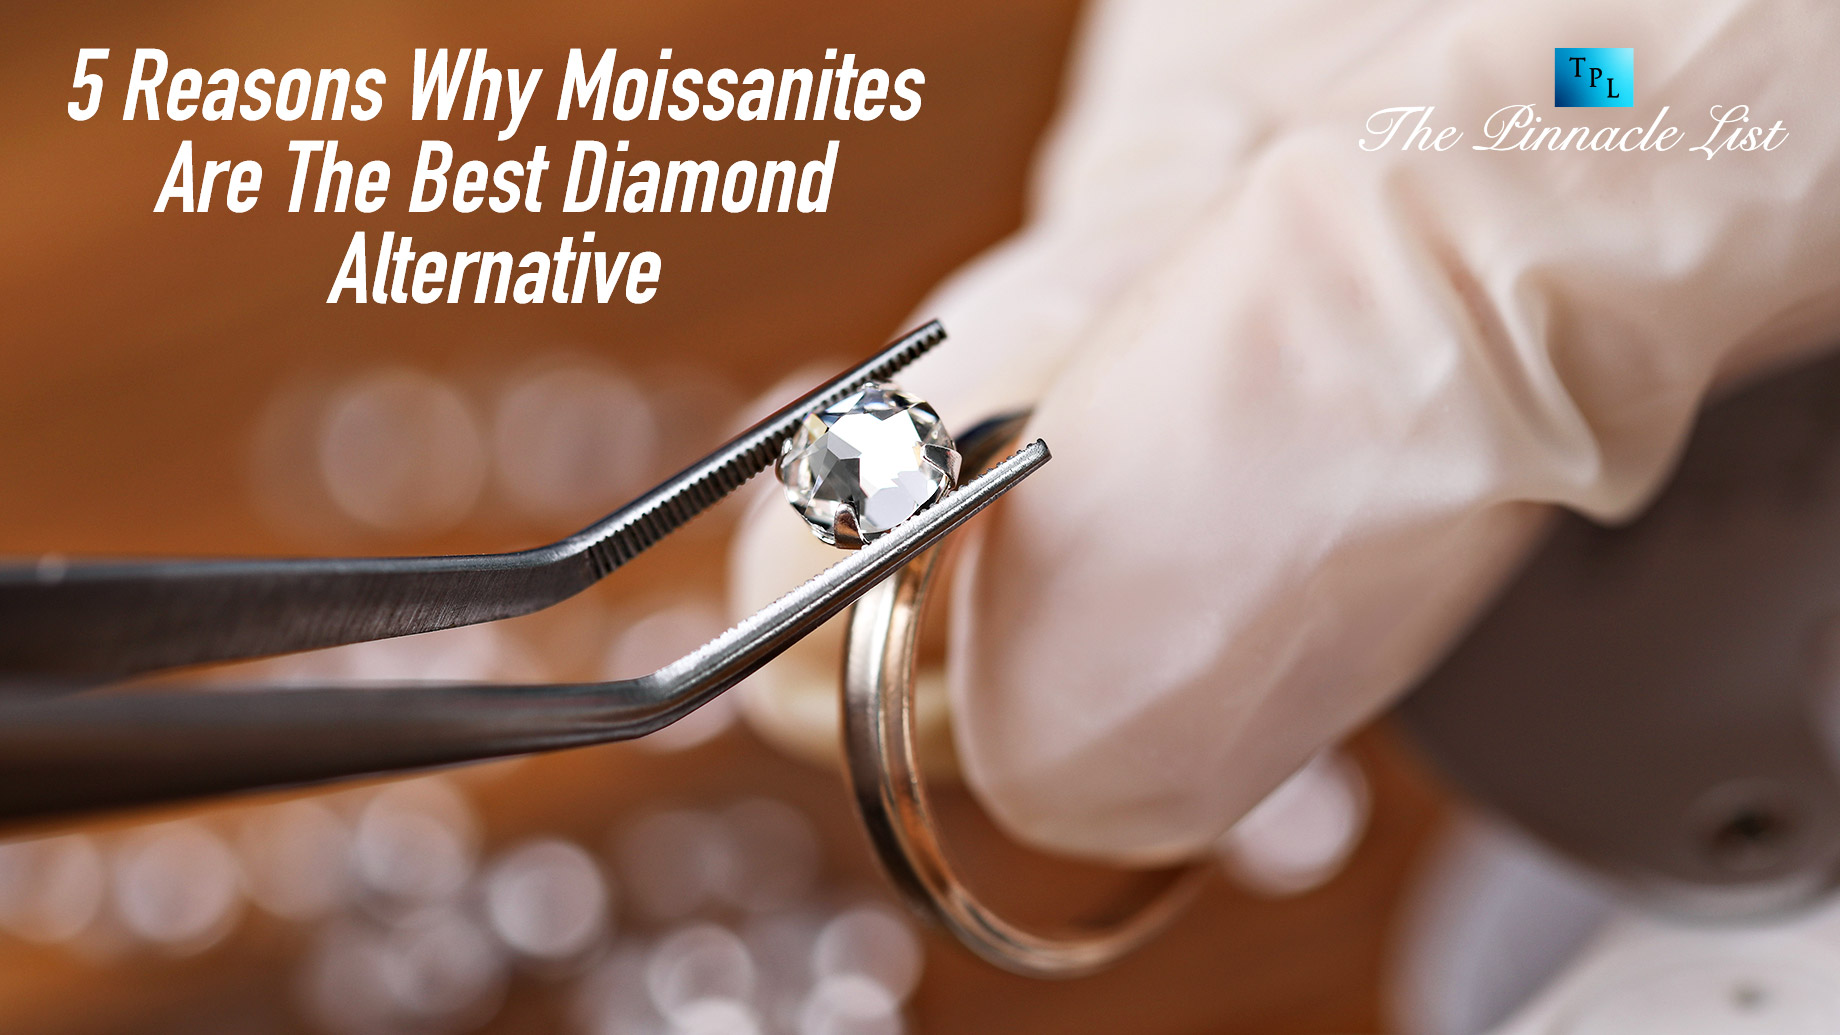 5 Reasons Why Moissanites Are The Best Diamond Alternative